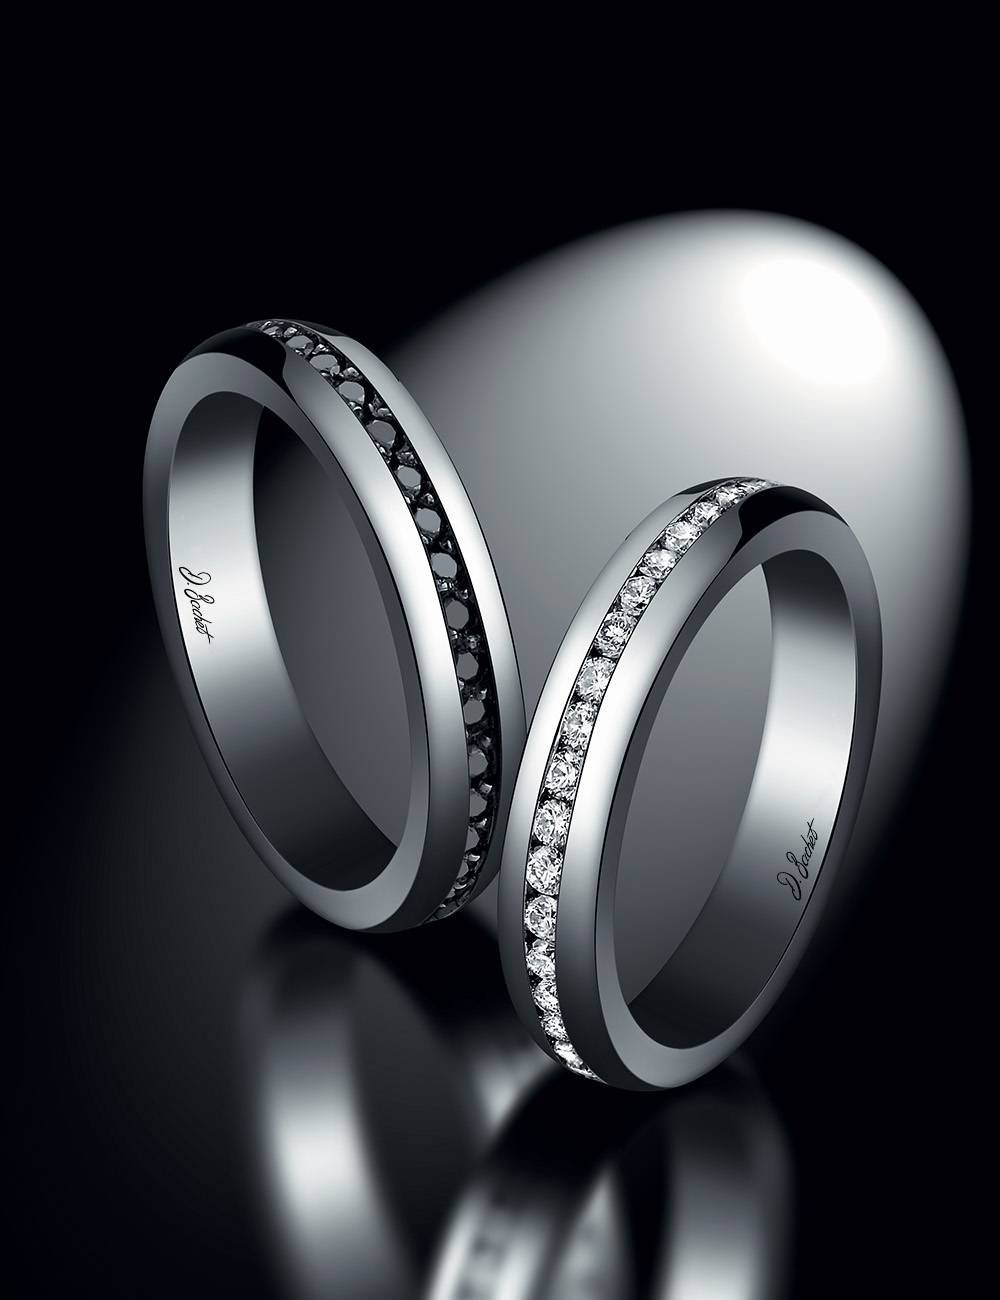 Women's 'A Way to Love' wedding band in platinum with white diamonds by D.Bachet, luxury French craftsmanship.